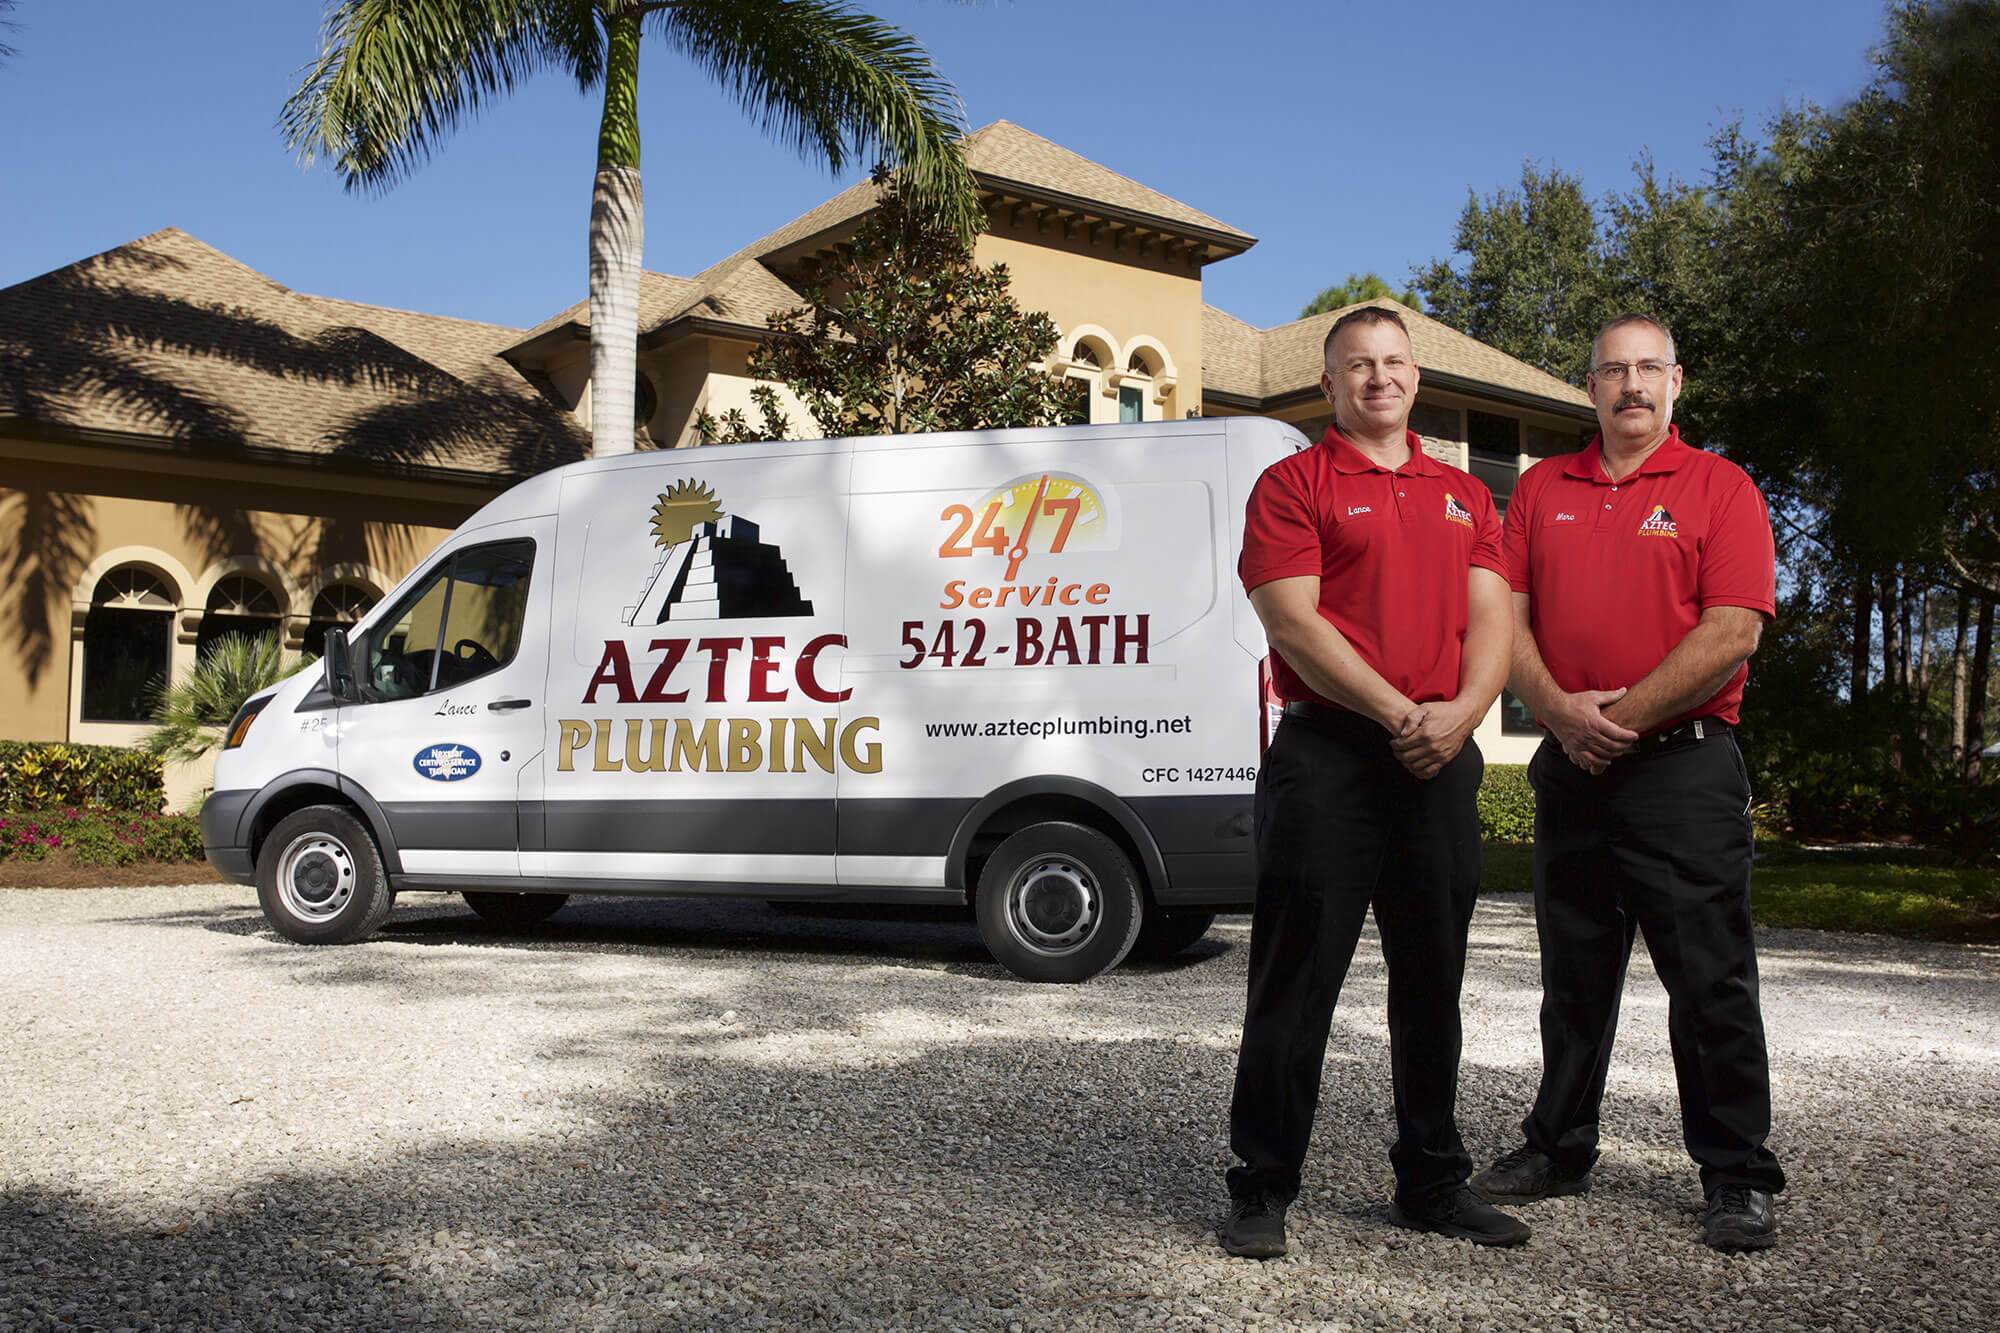 Aztec Plumbing plumbers standing in front of company truck in Fort Myers